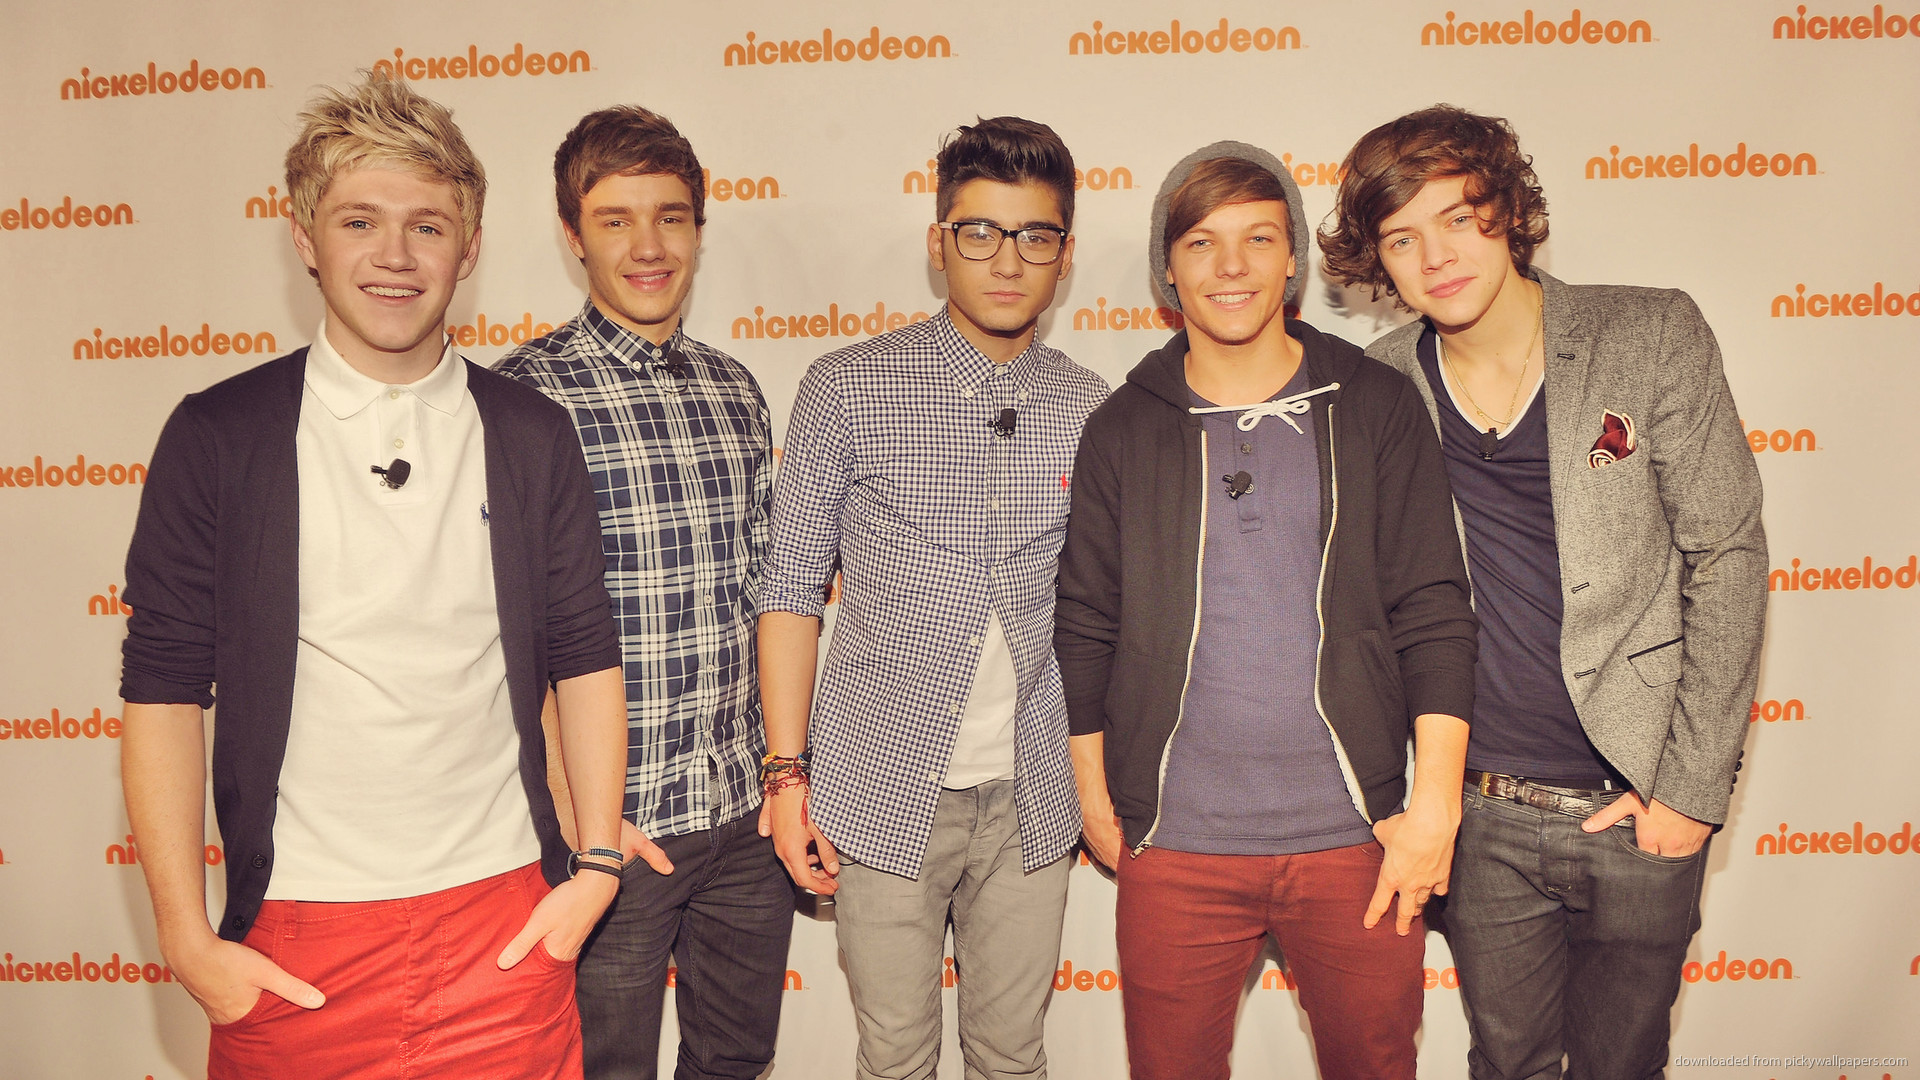 One Direction Nickelodeon picture